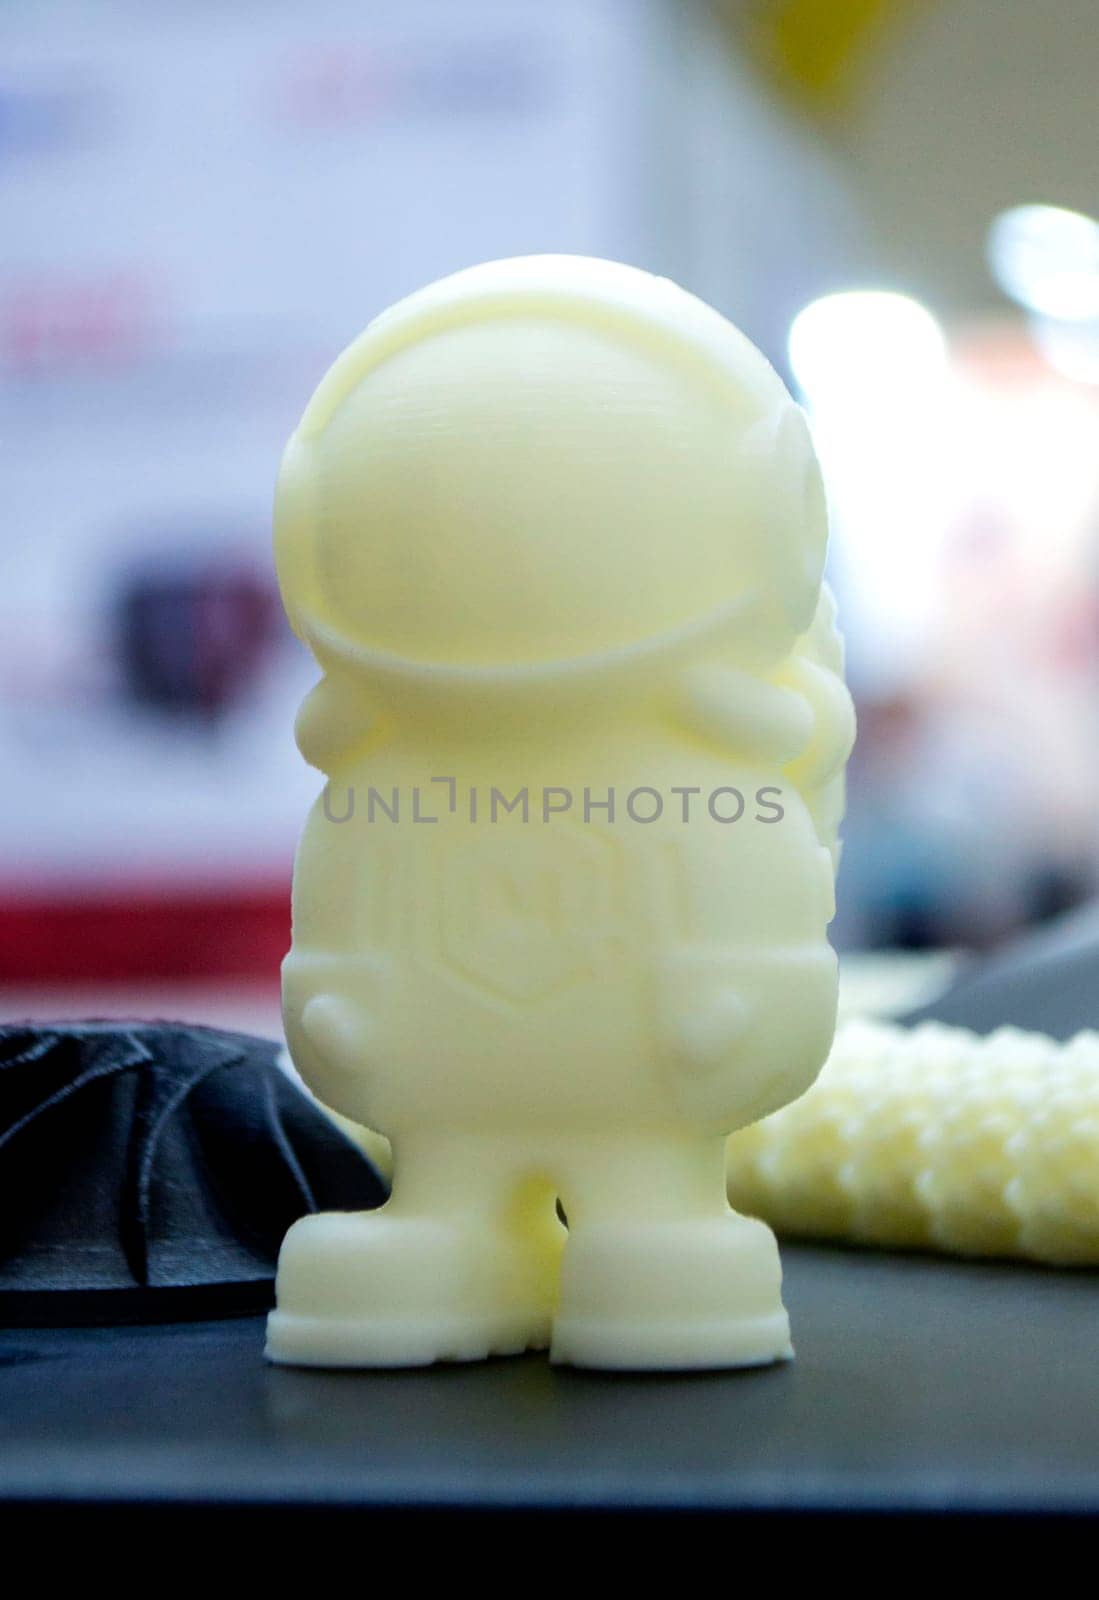 3D printer printing prototype of toy from molten plastic. Process of creating prototype model of toy on 3D printer from yellow melted plastic close-up. Additive new printer technology. Modern printing